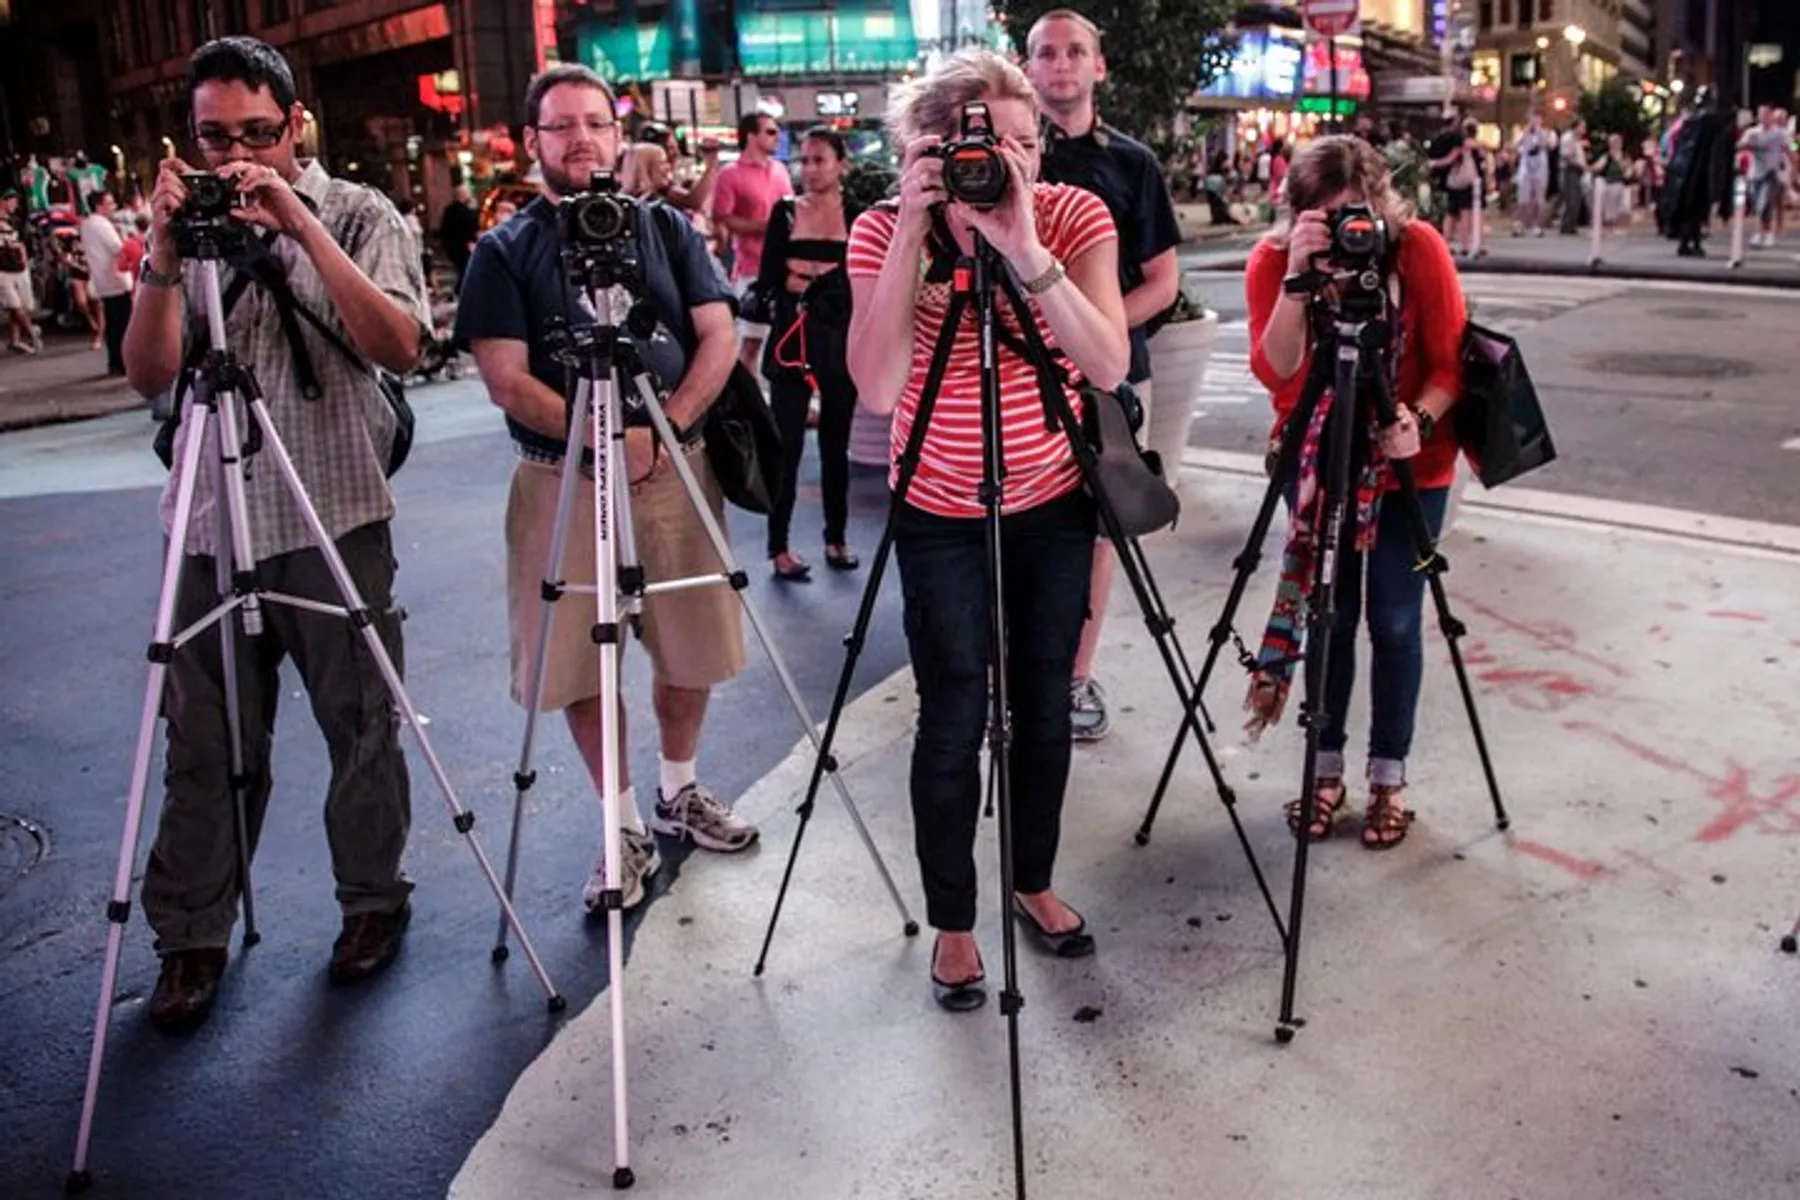 A group of photographers with their cameras mounted on tripods are taking pictures in a bustling urban setting at night.